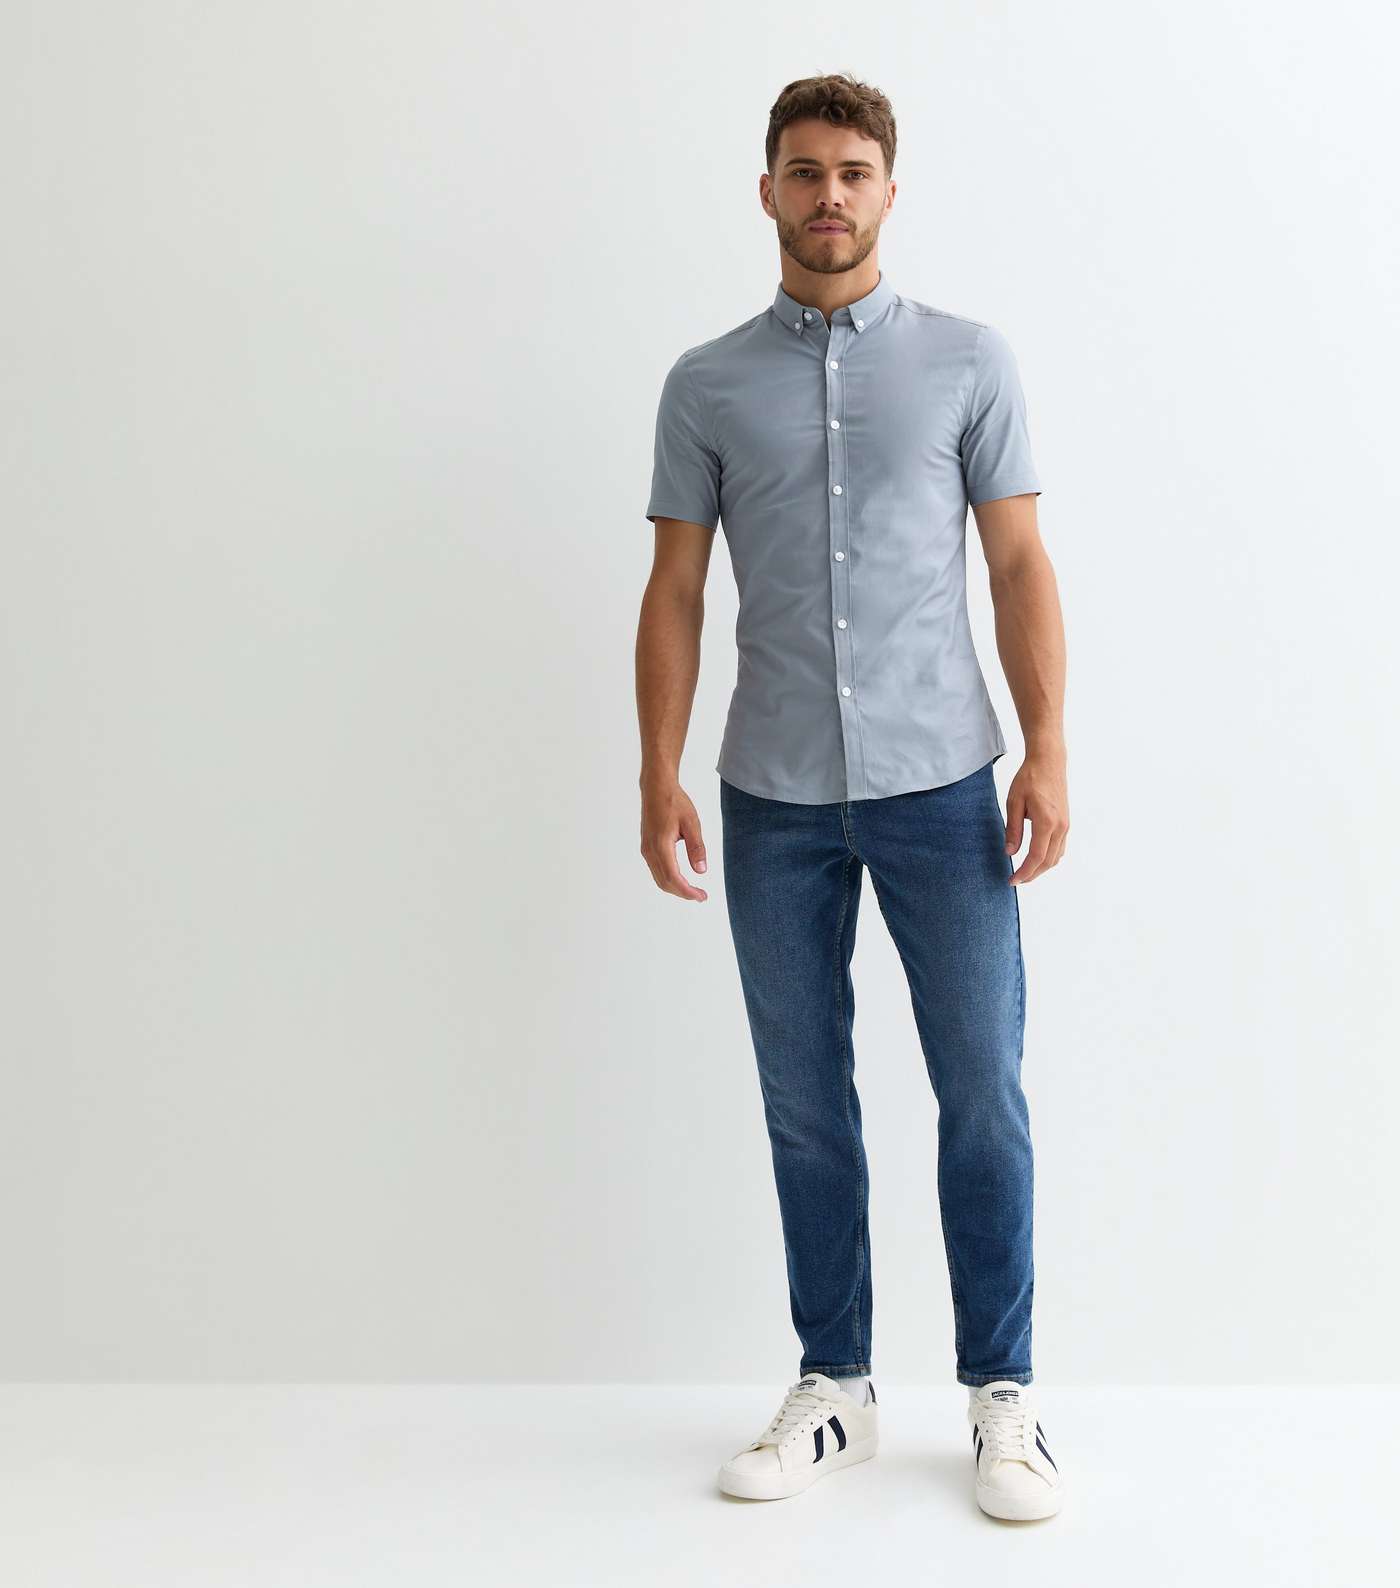 Pale Grey Short Sleeve Muscle Fit Oxford Shirt Image 3